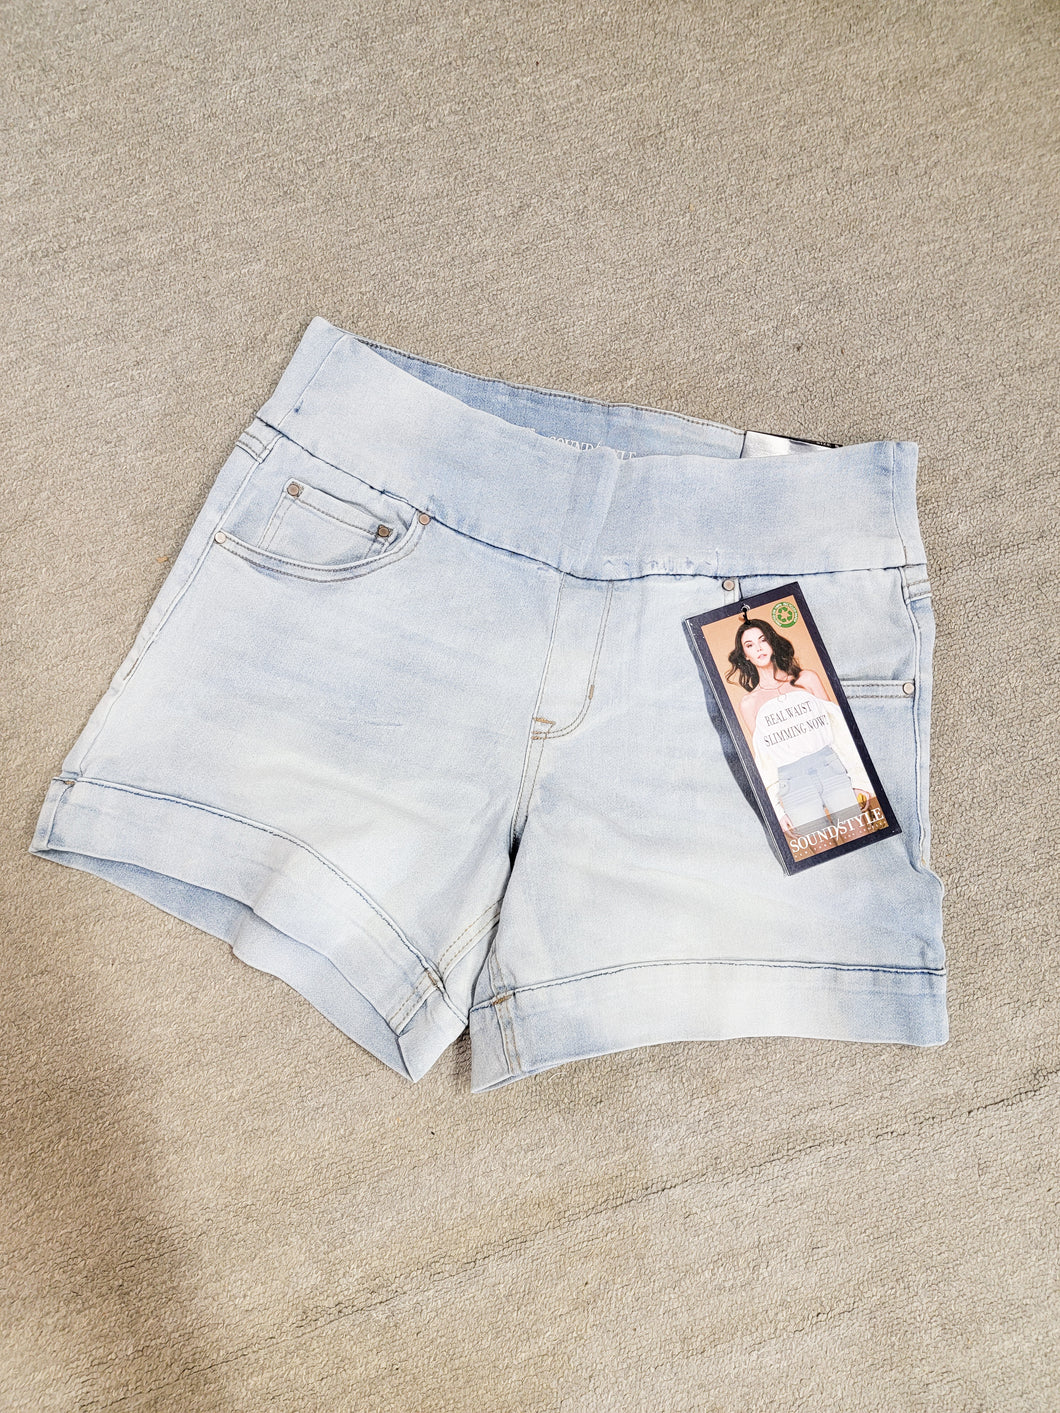 Frayed Denim Shorts for Summer - Dressed for My Day